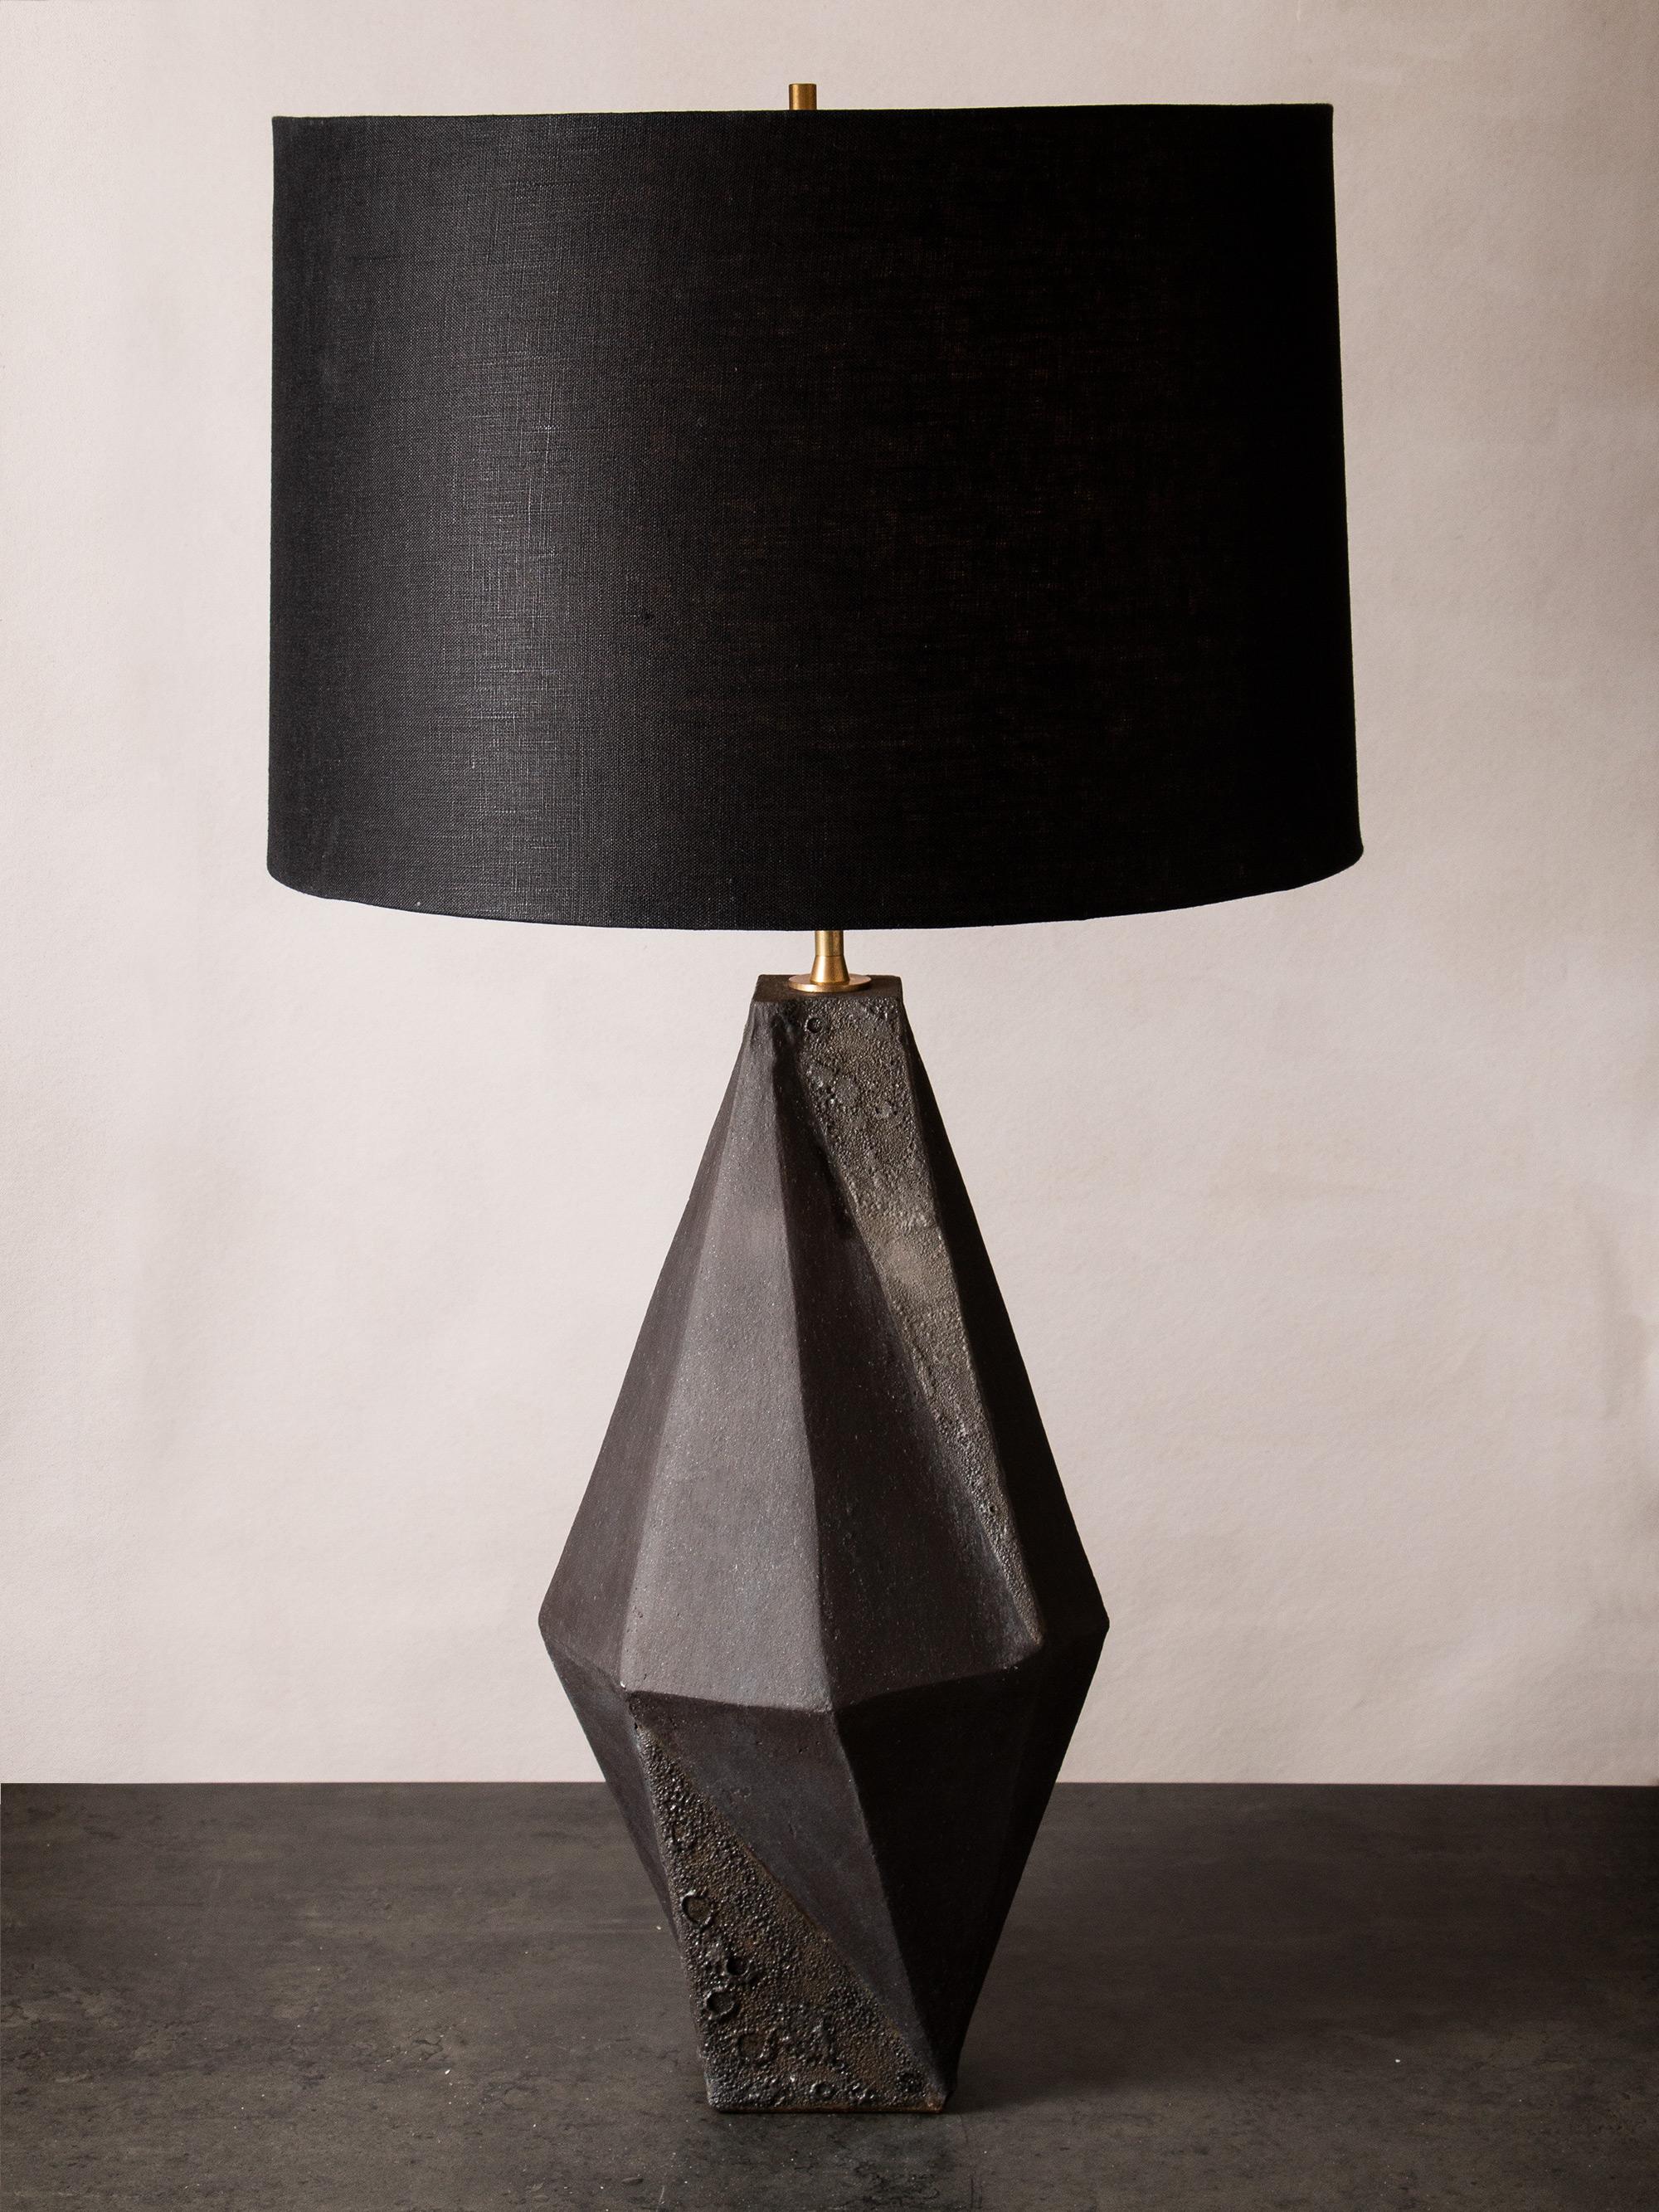 This dramatic black ceramic table lamp features a complex geometric shape, accentuated by contrasting matte black and textured black glazes. Each piece is individually handmade and entirely unique. The lamp is finished with raw brass hardware and a